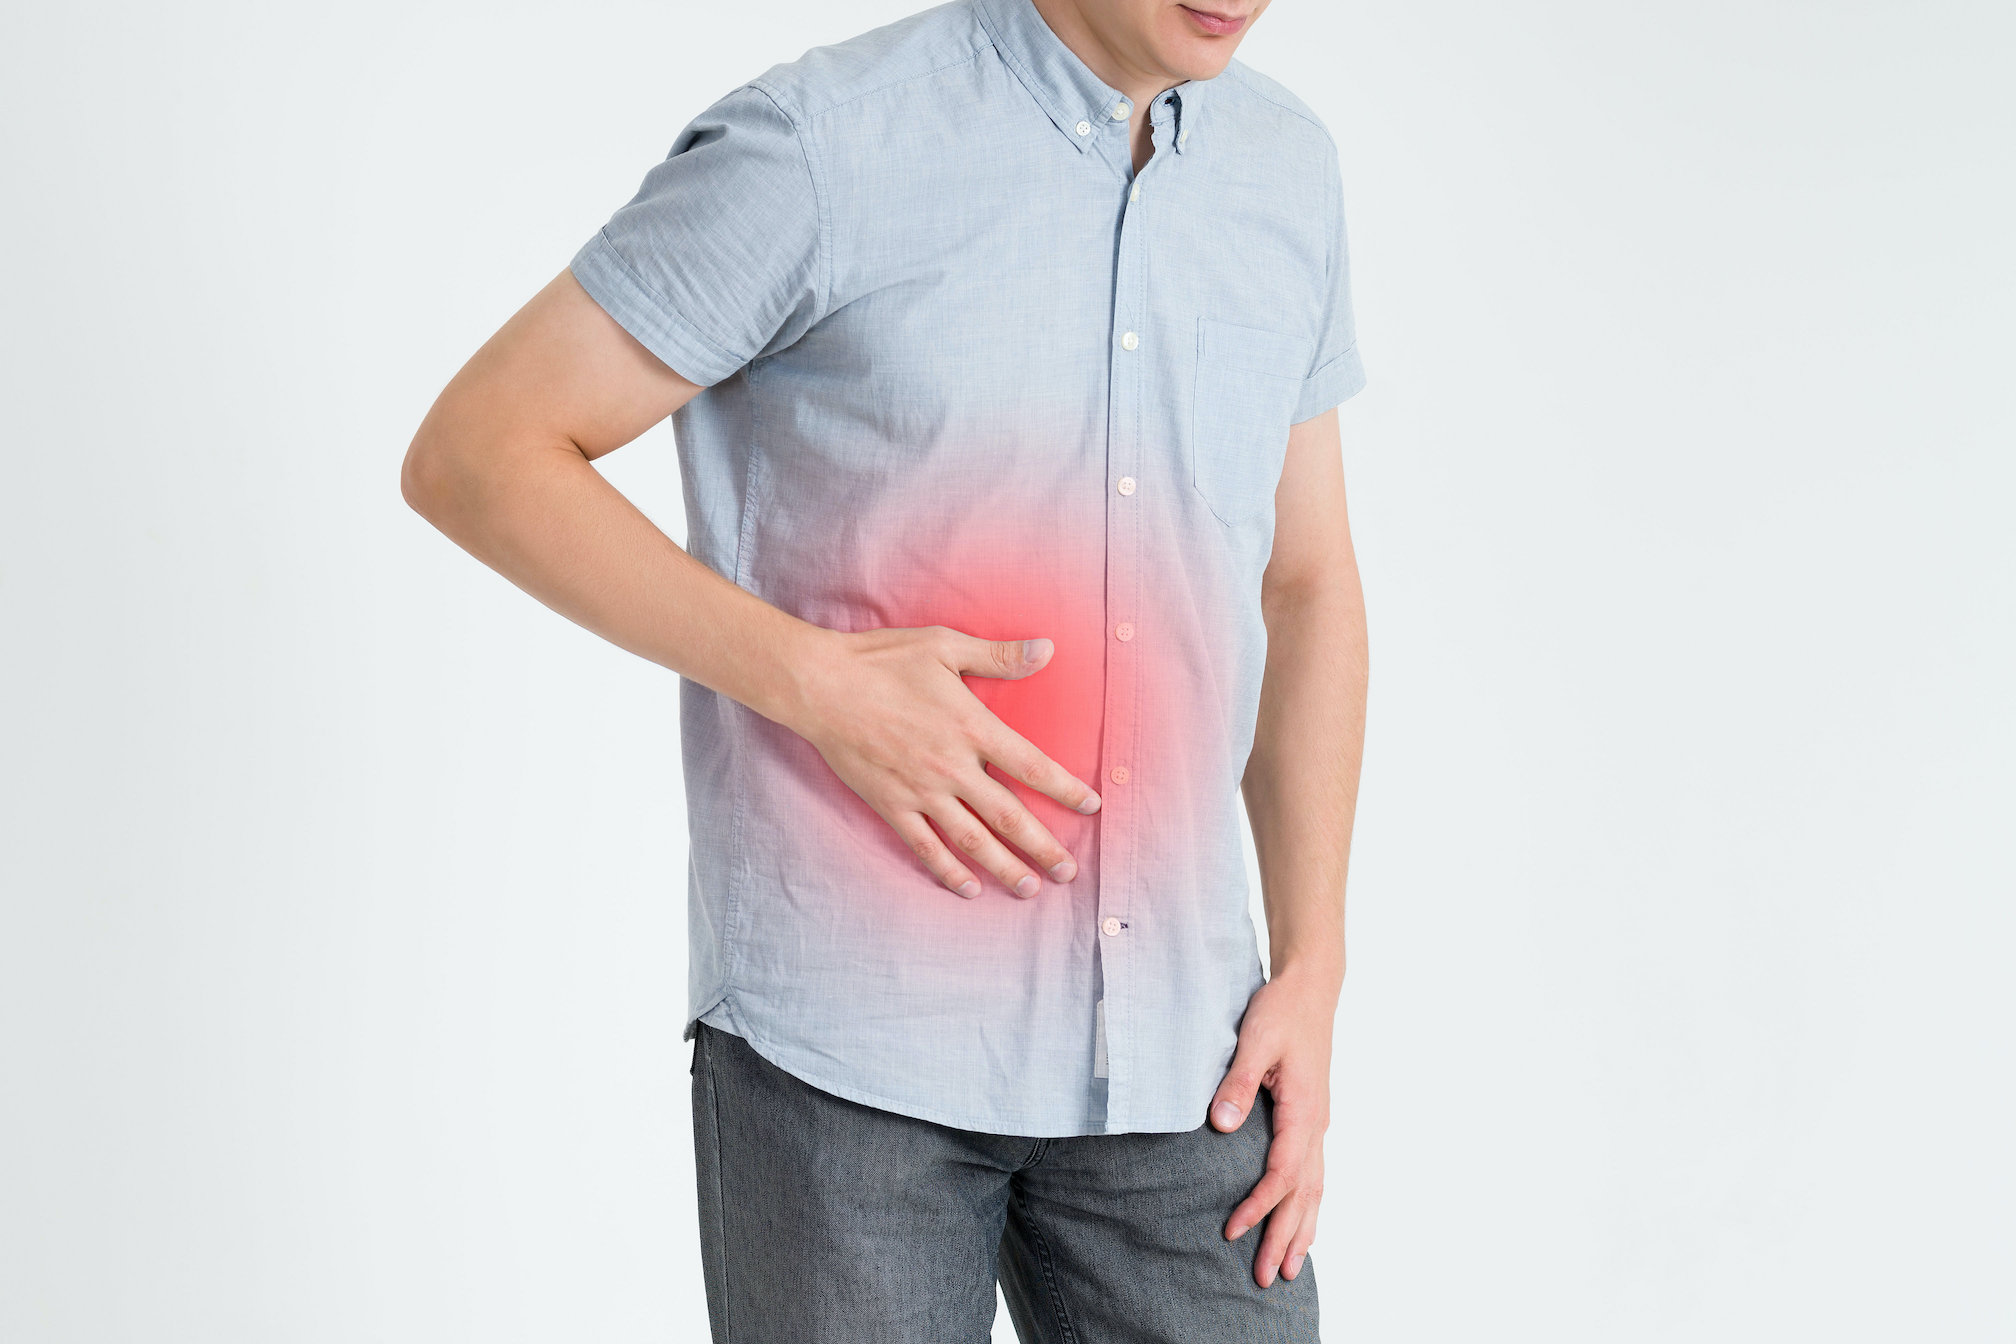 An image of a man holding his gut